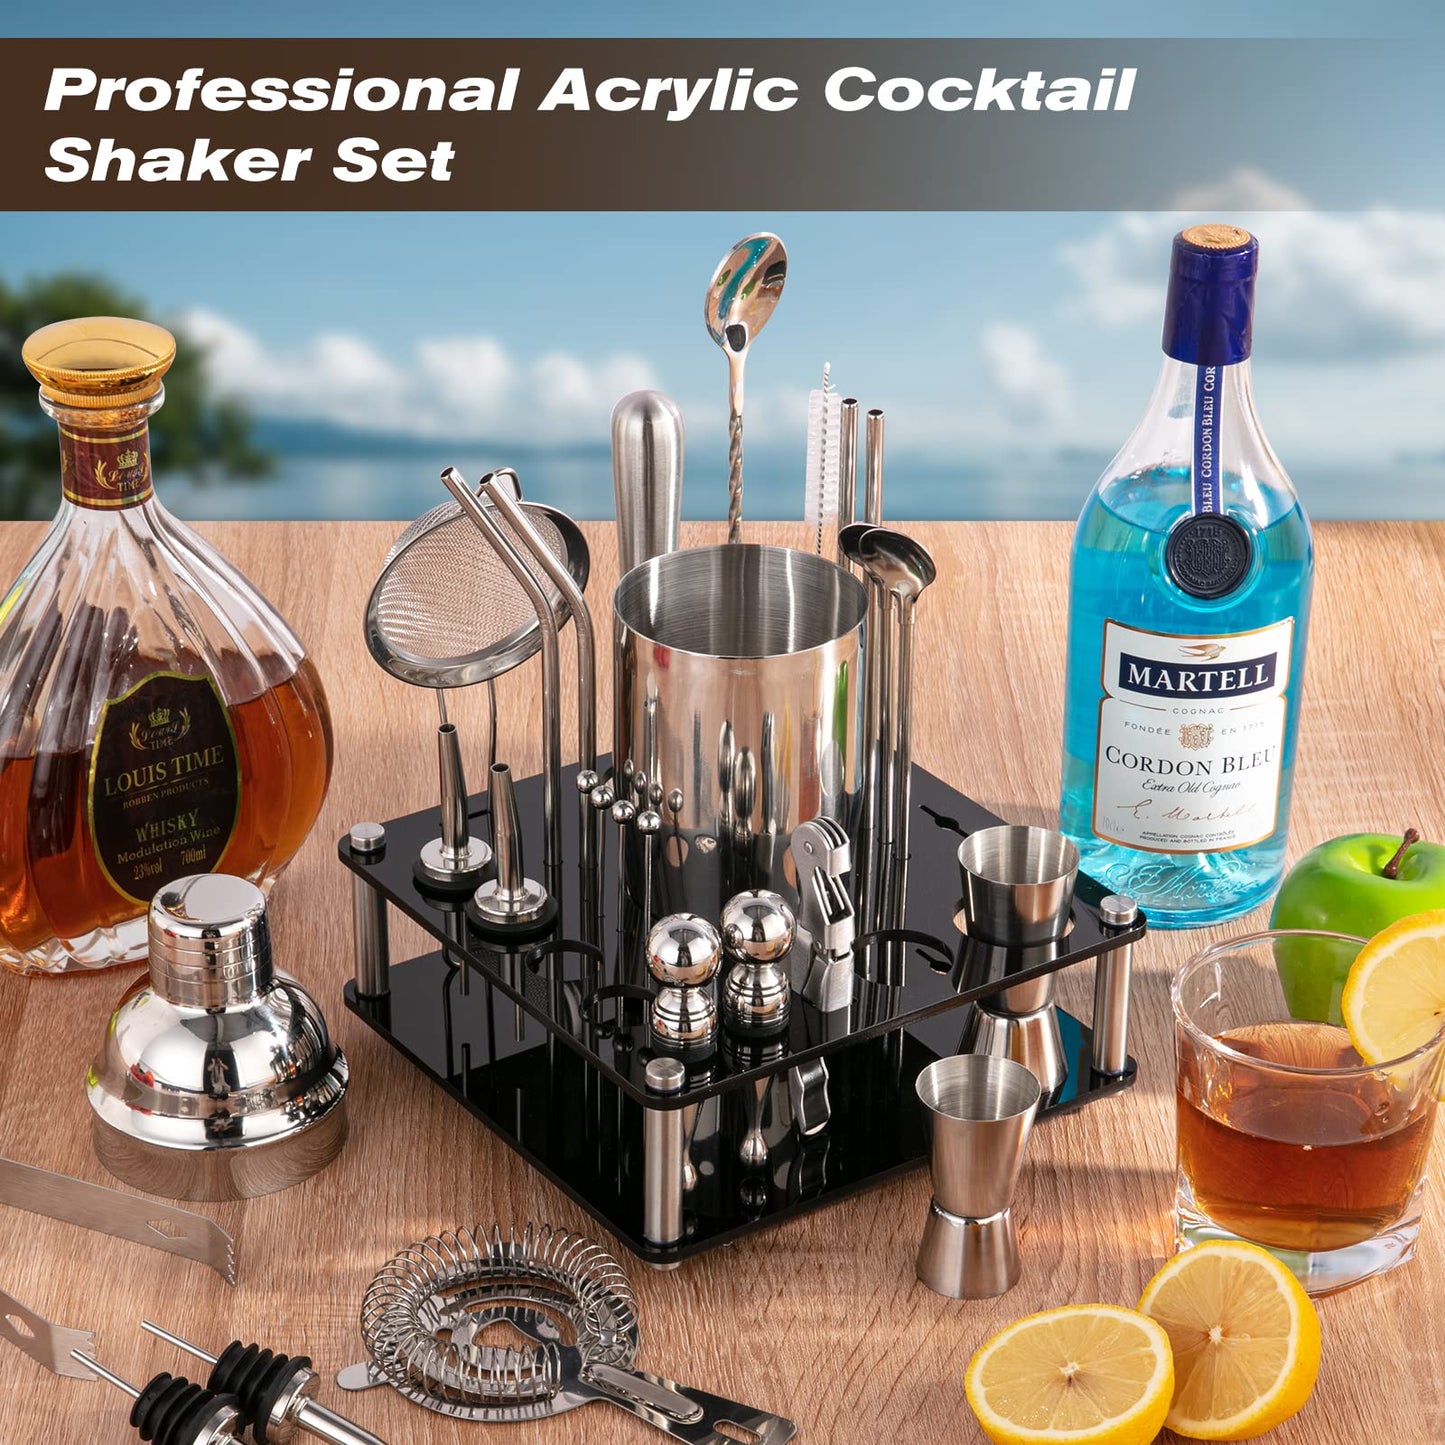 KINGROW Mixology Cocktail Shaker Set - Complete 29-Piece Bartender Kit and Bar Tools with Acrylic Rotating Stand, Professional Bar Set for Drink Mixing, Home, Bar, Party (Sliver)